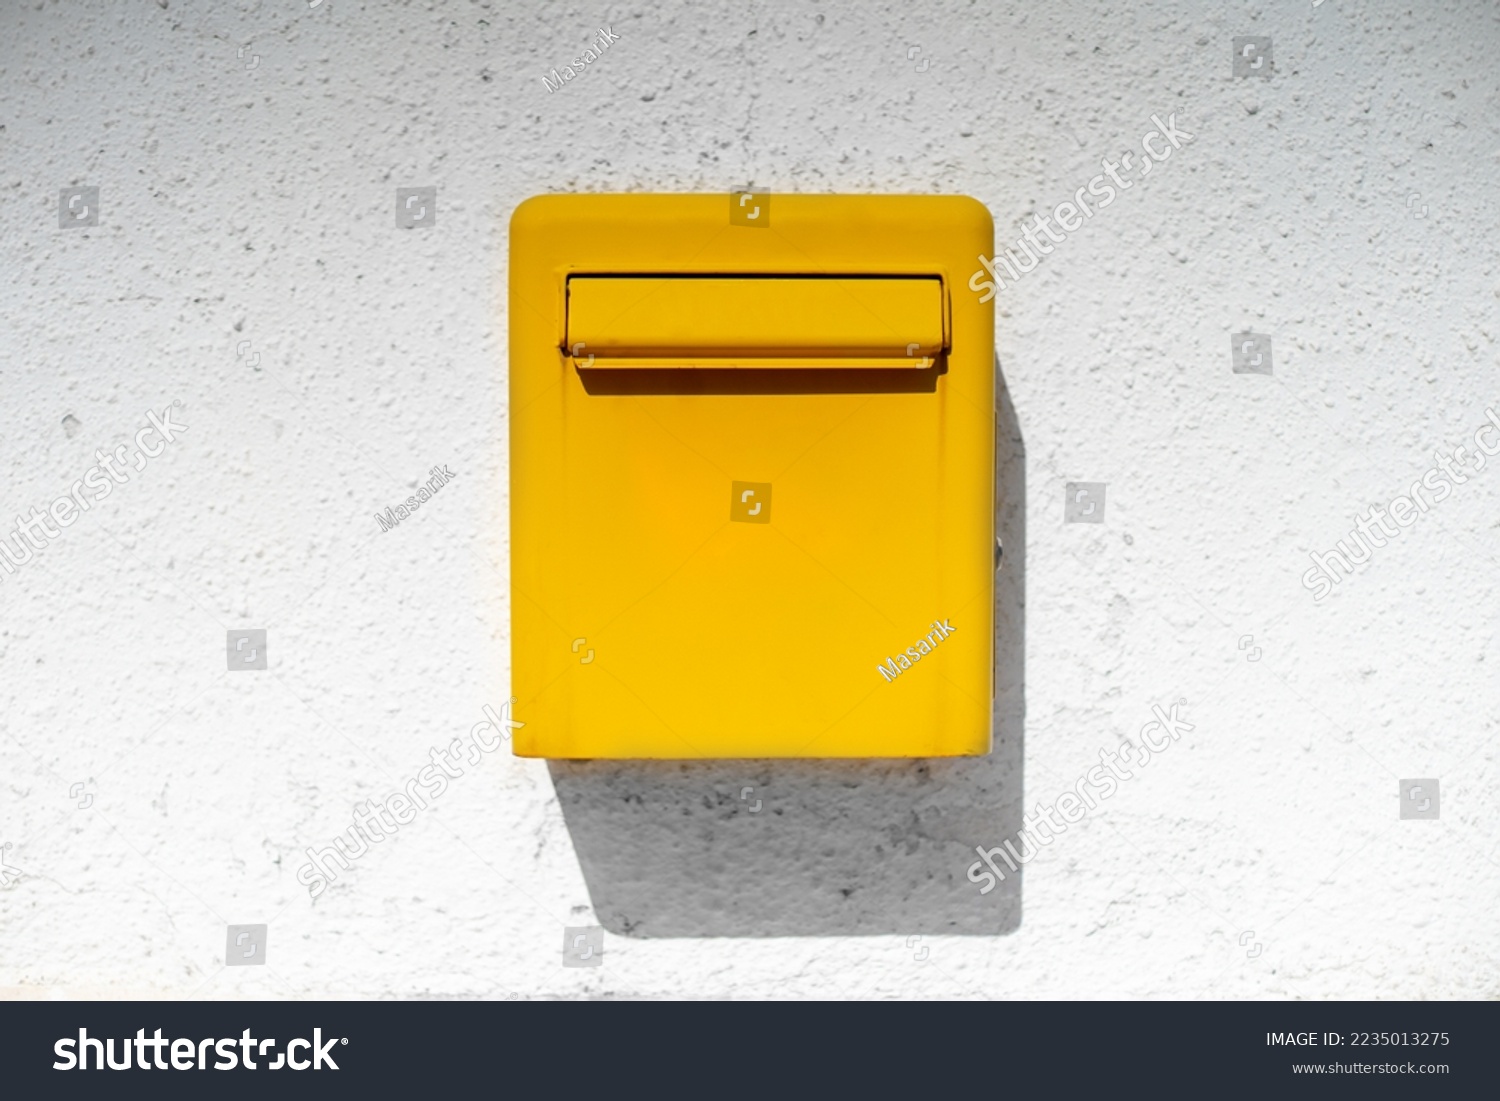 Yellow bright metal mailbox hangs on white rough wall casting shadow from sun. Stylish detail in interior of house authentic street box for letters postcards. Background good news holiday messages #2235013275